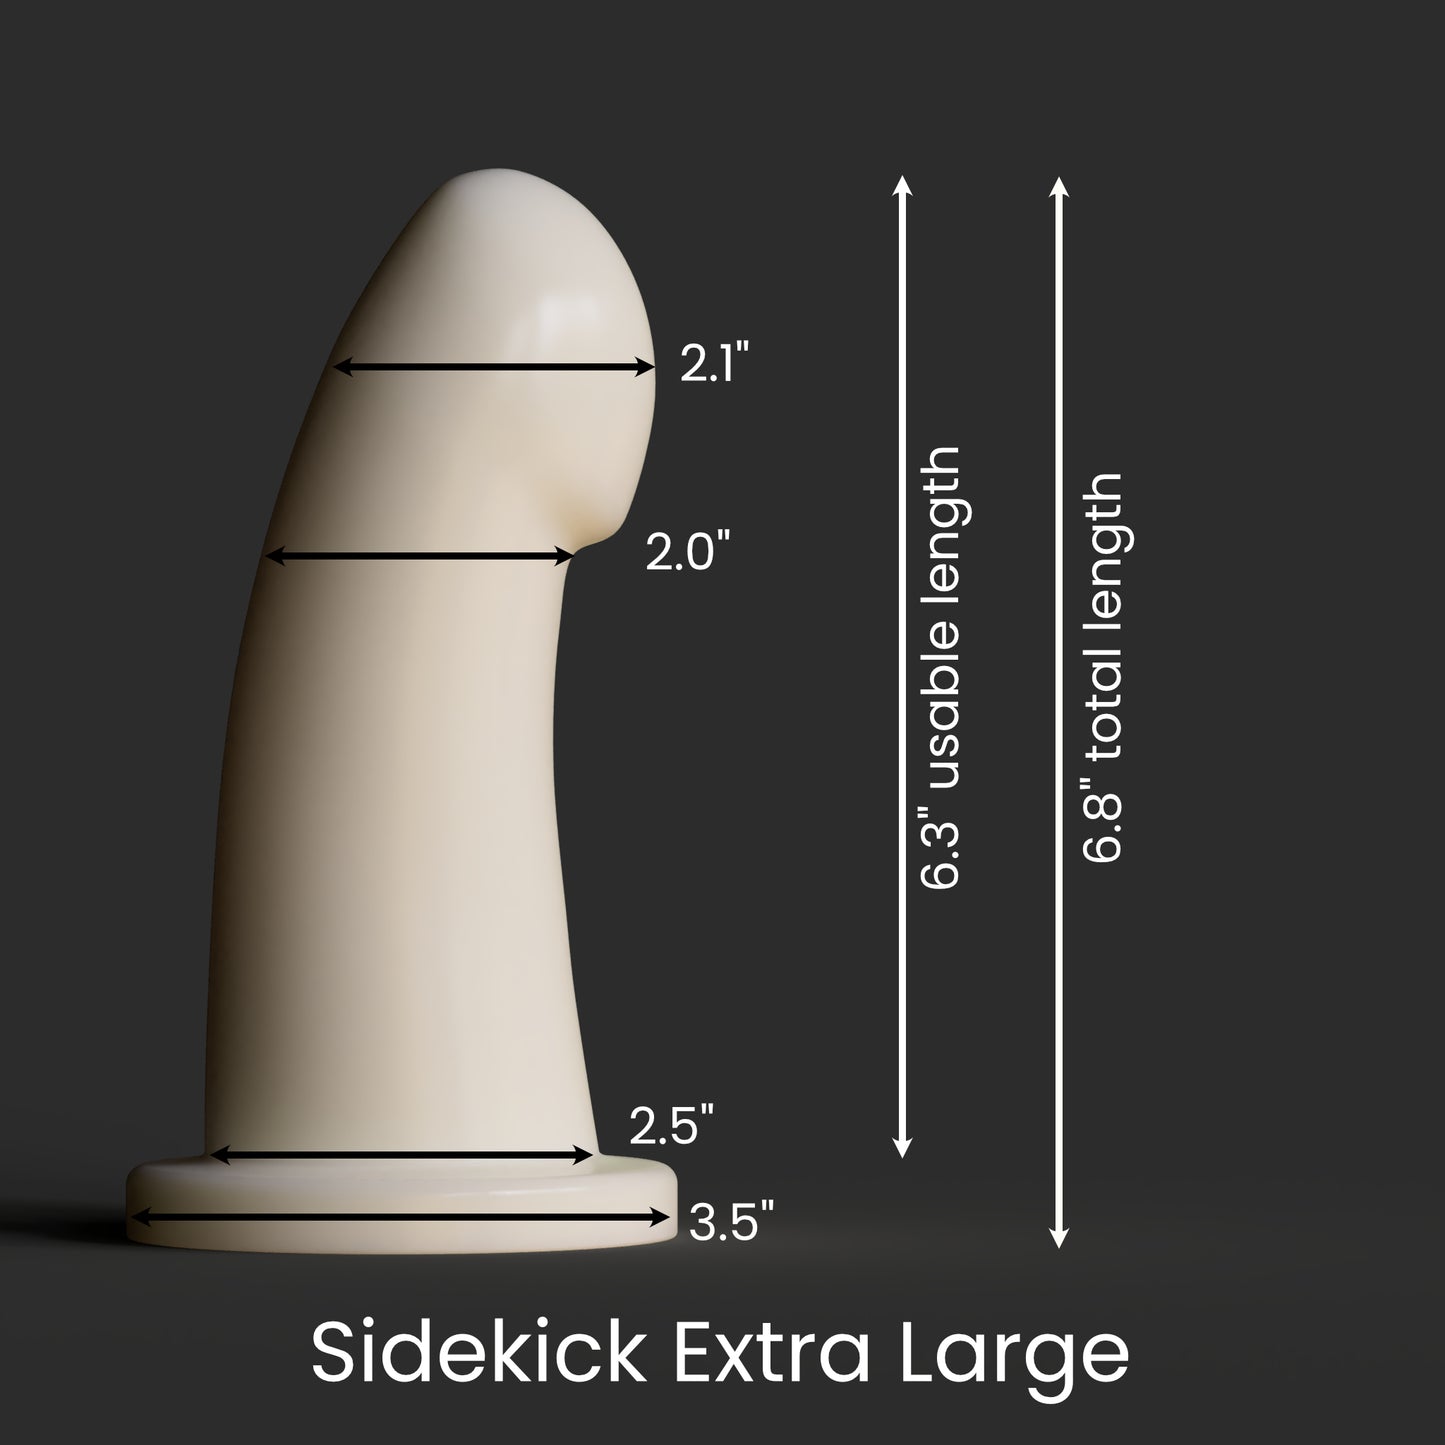 Diagram showing the dimensions of the Sidekick Extra Large as described in the product description.